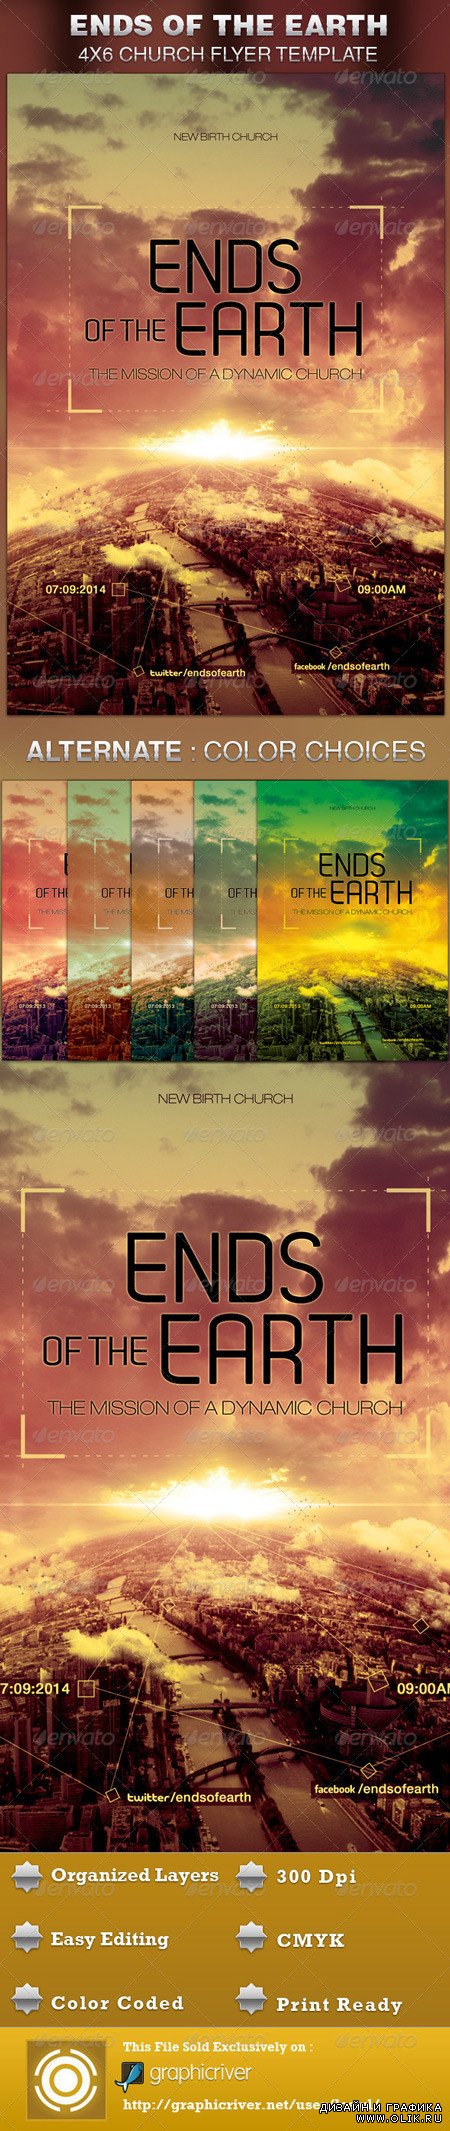 Ends of the Earth Church Flyer Template